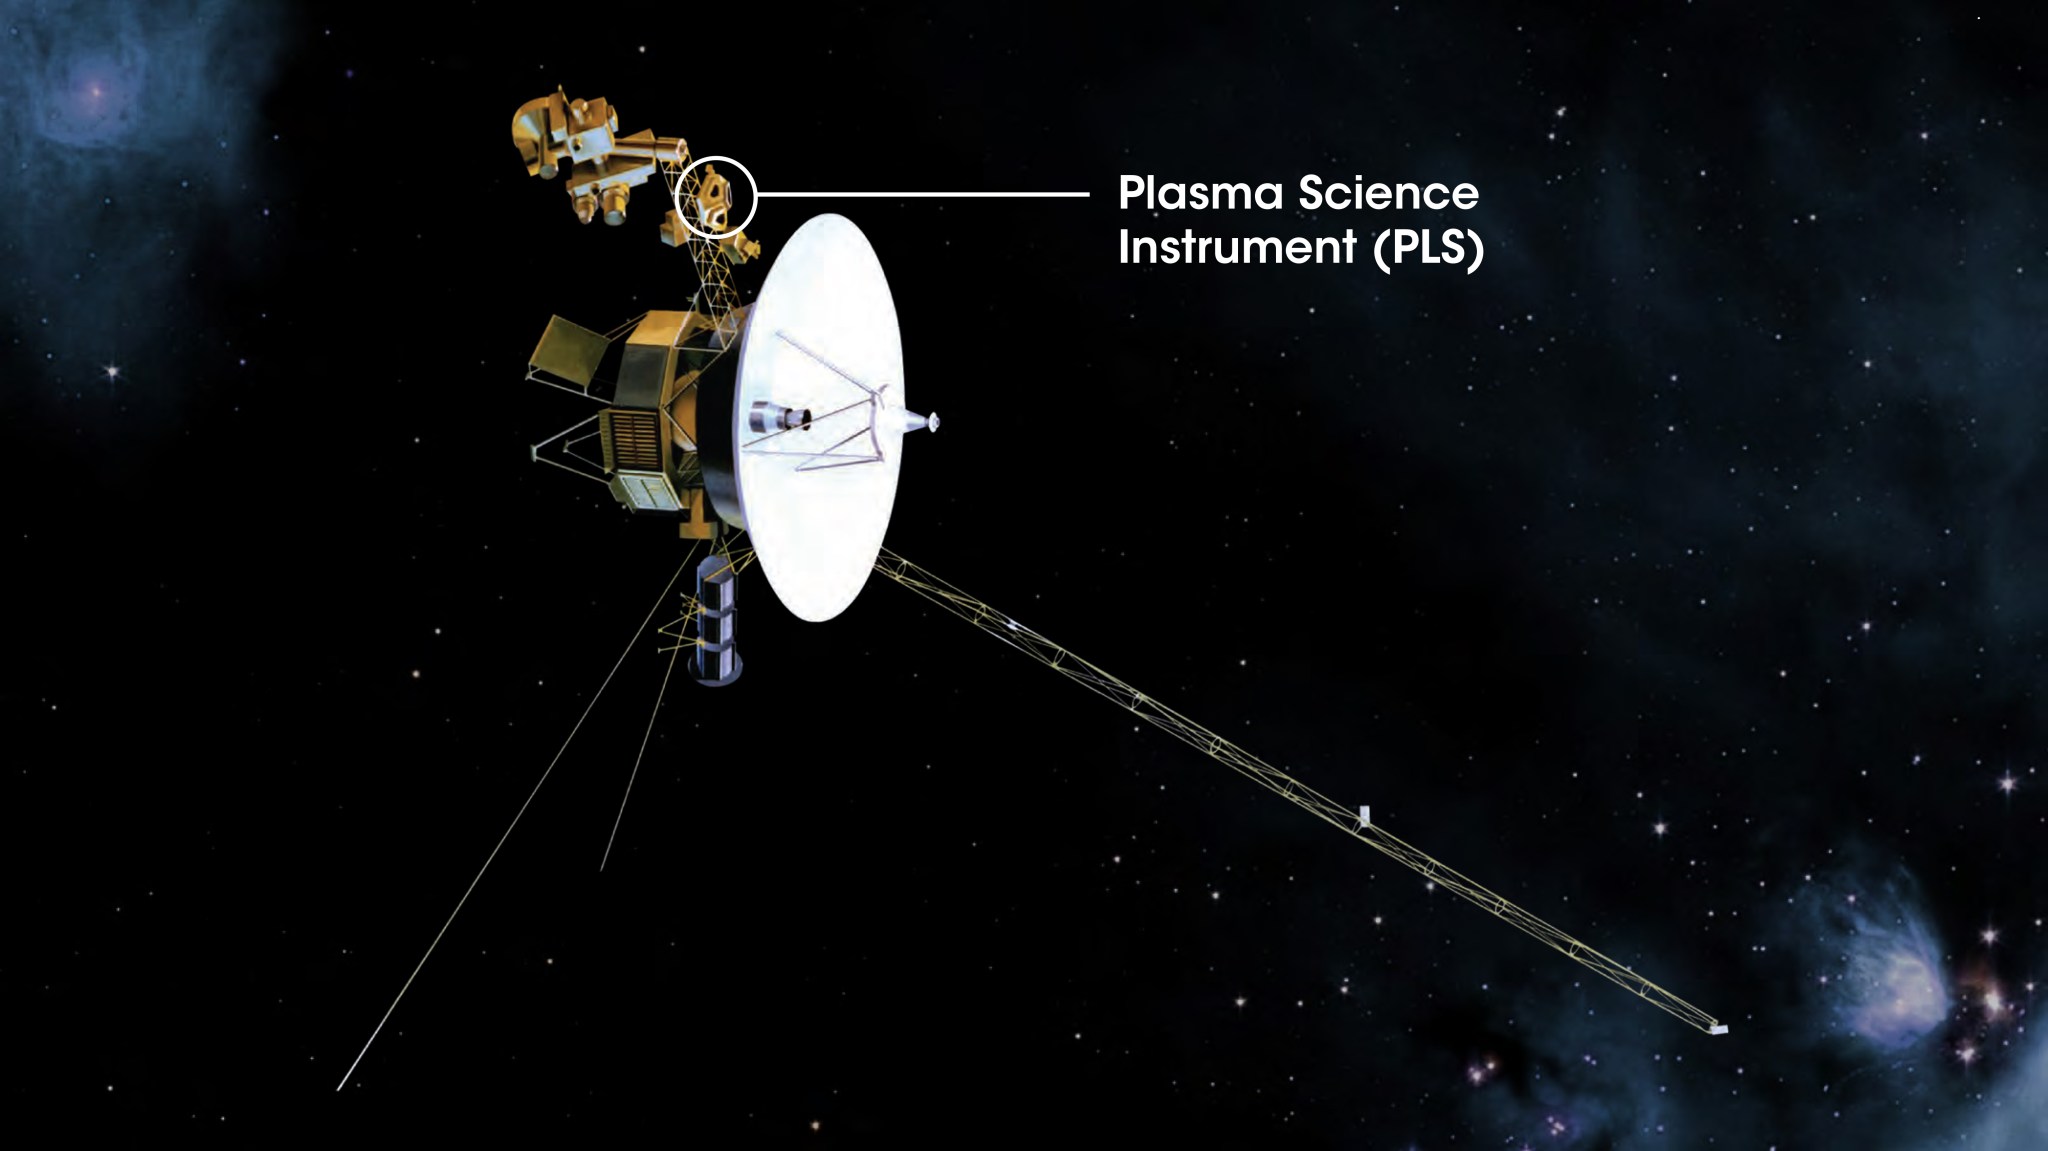 Illustration of Voyager, a gold spacecraft with a large white satellite dish and spindly antenna. A gold instrument just behind the satellite dish is labeled "Plasma Science Instrument (PSI)."